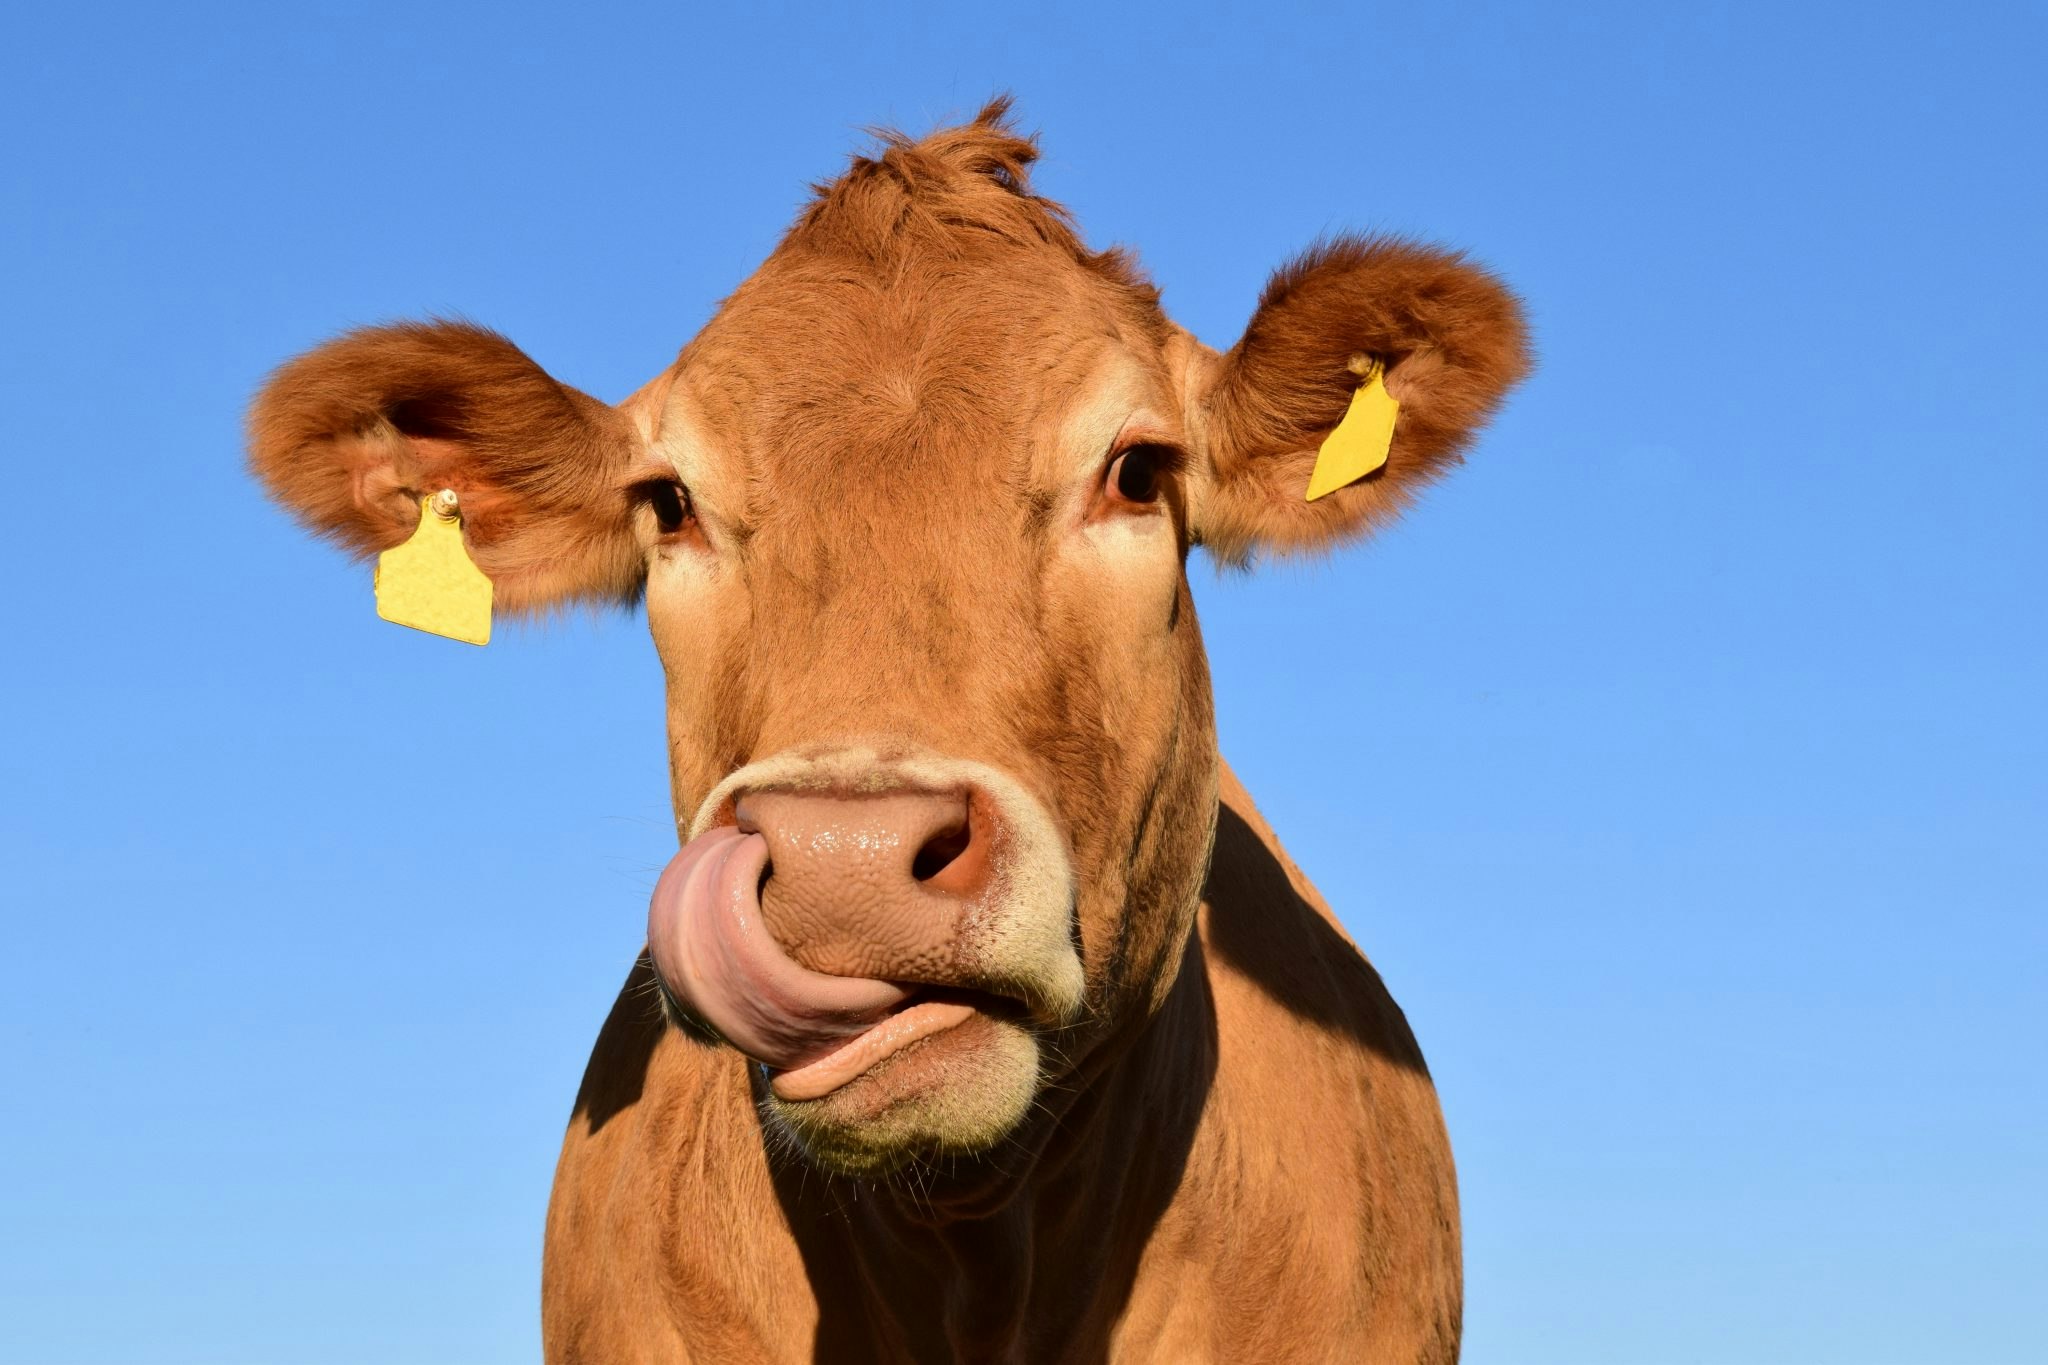 Image of a brown cow